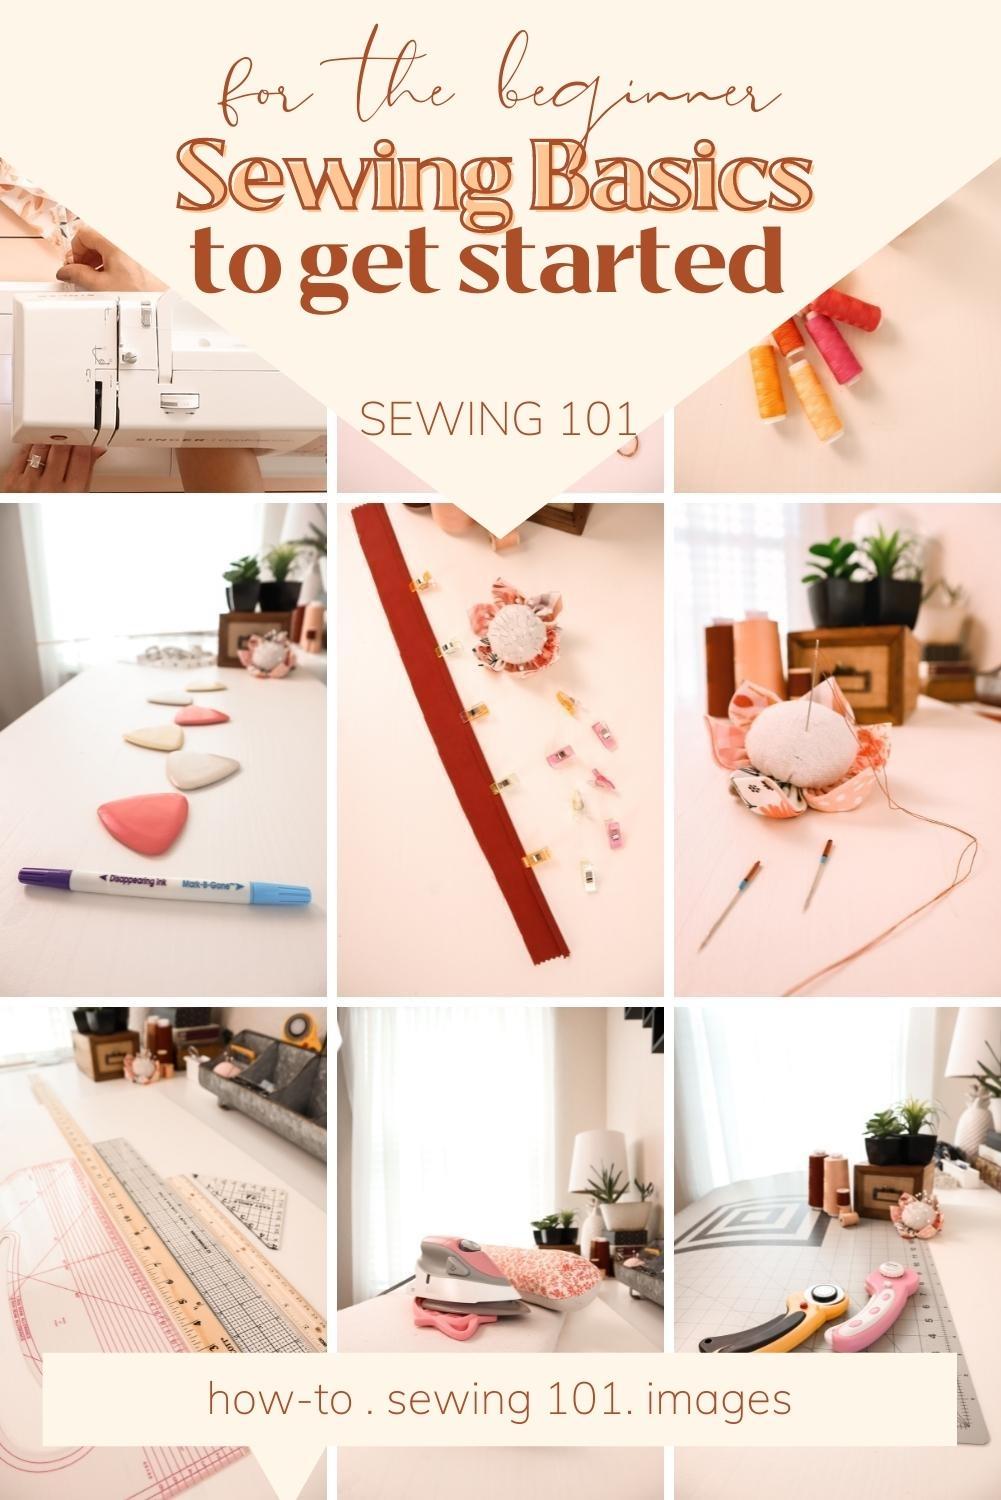 Sewing Basics to get started